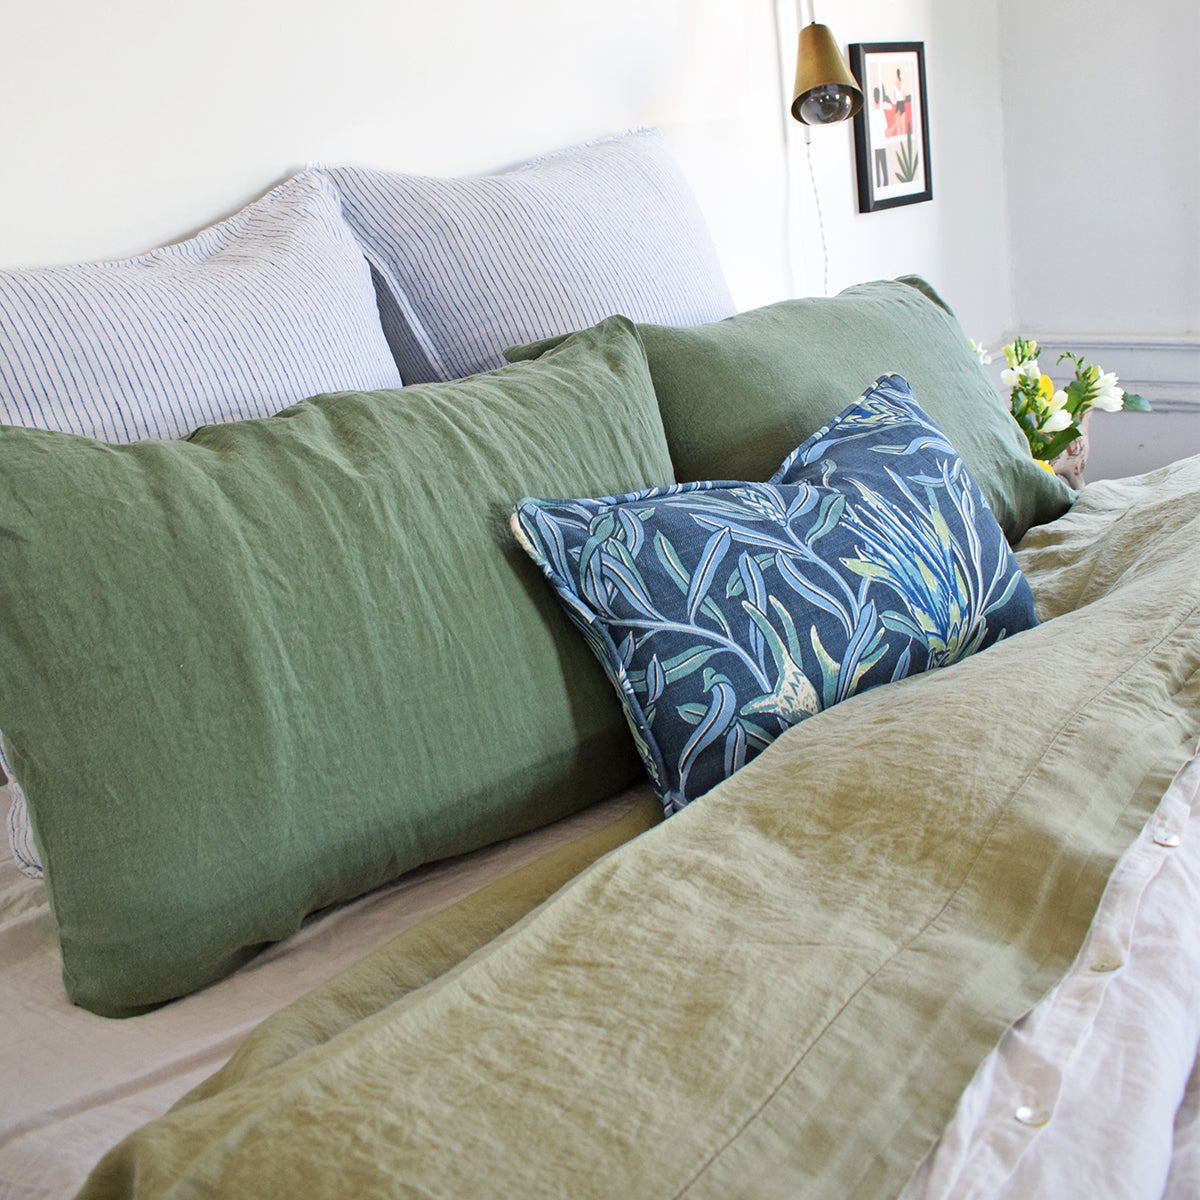 Linge Particulier Jade Green Standard Linen Pillowcase Sham with a fennel green linen sheet and blue Utopia Goods pillow for a colorful linen bedding look in camo green - Collyer&#39;s Mansion